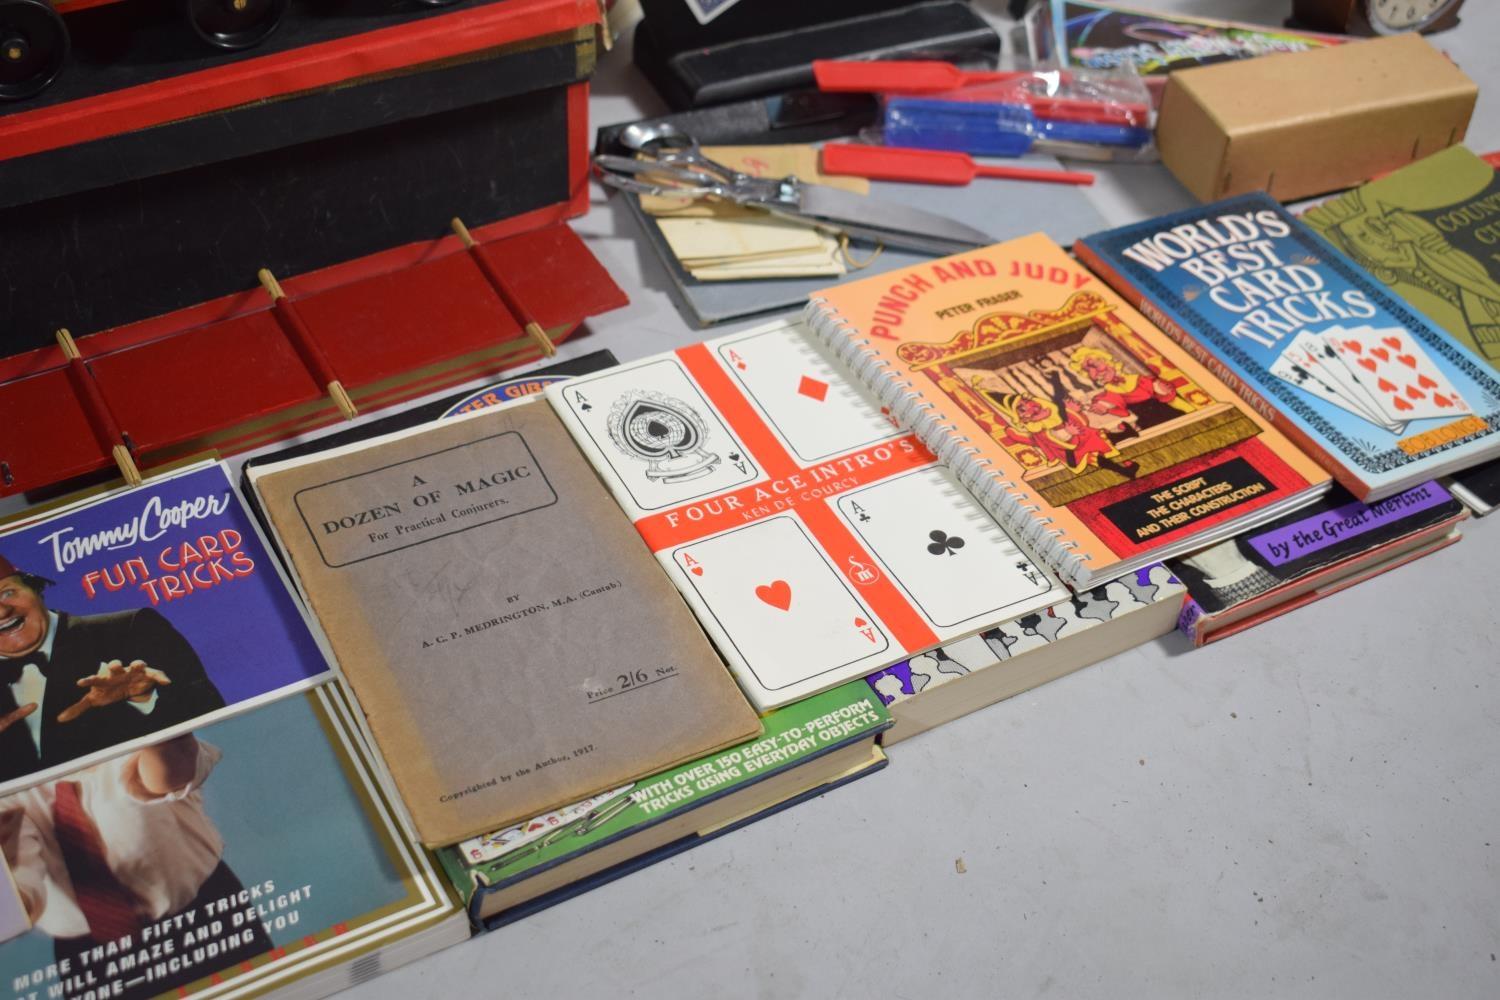 A Collection of Conjuror's Props and Tricks, Books and Magazines Etc. - Image 15 of 34